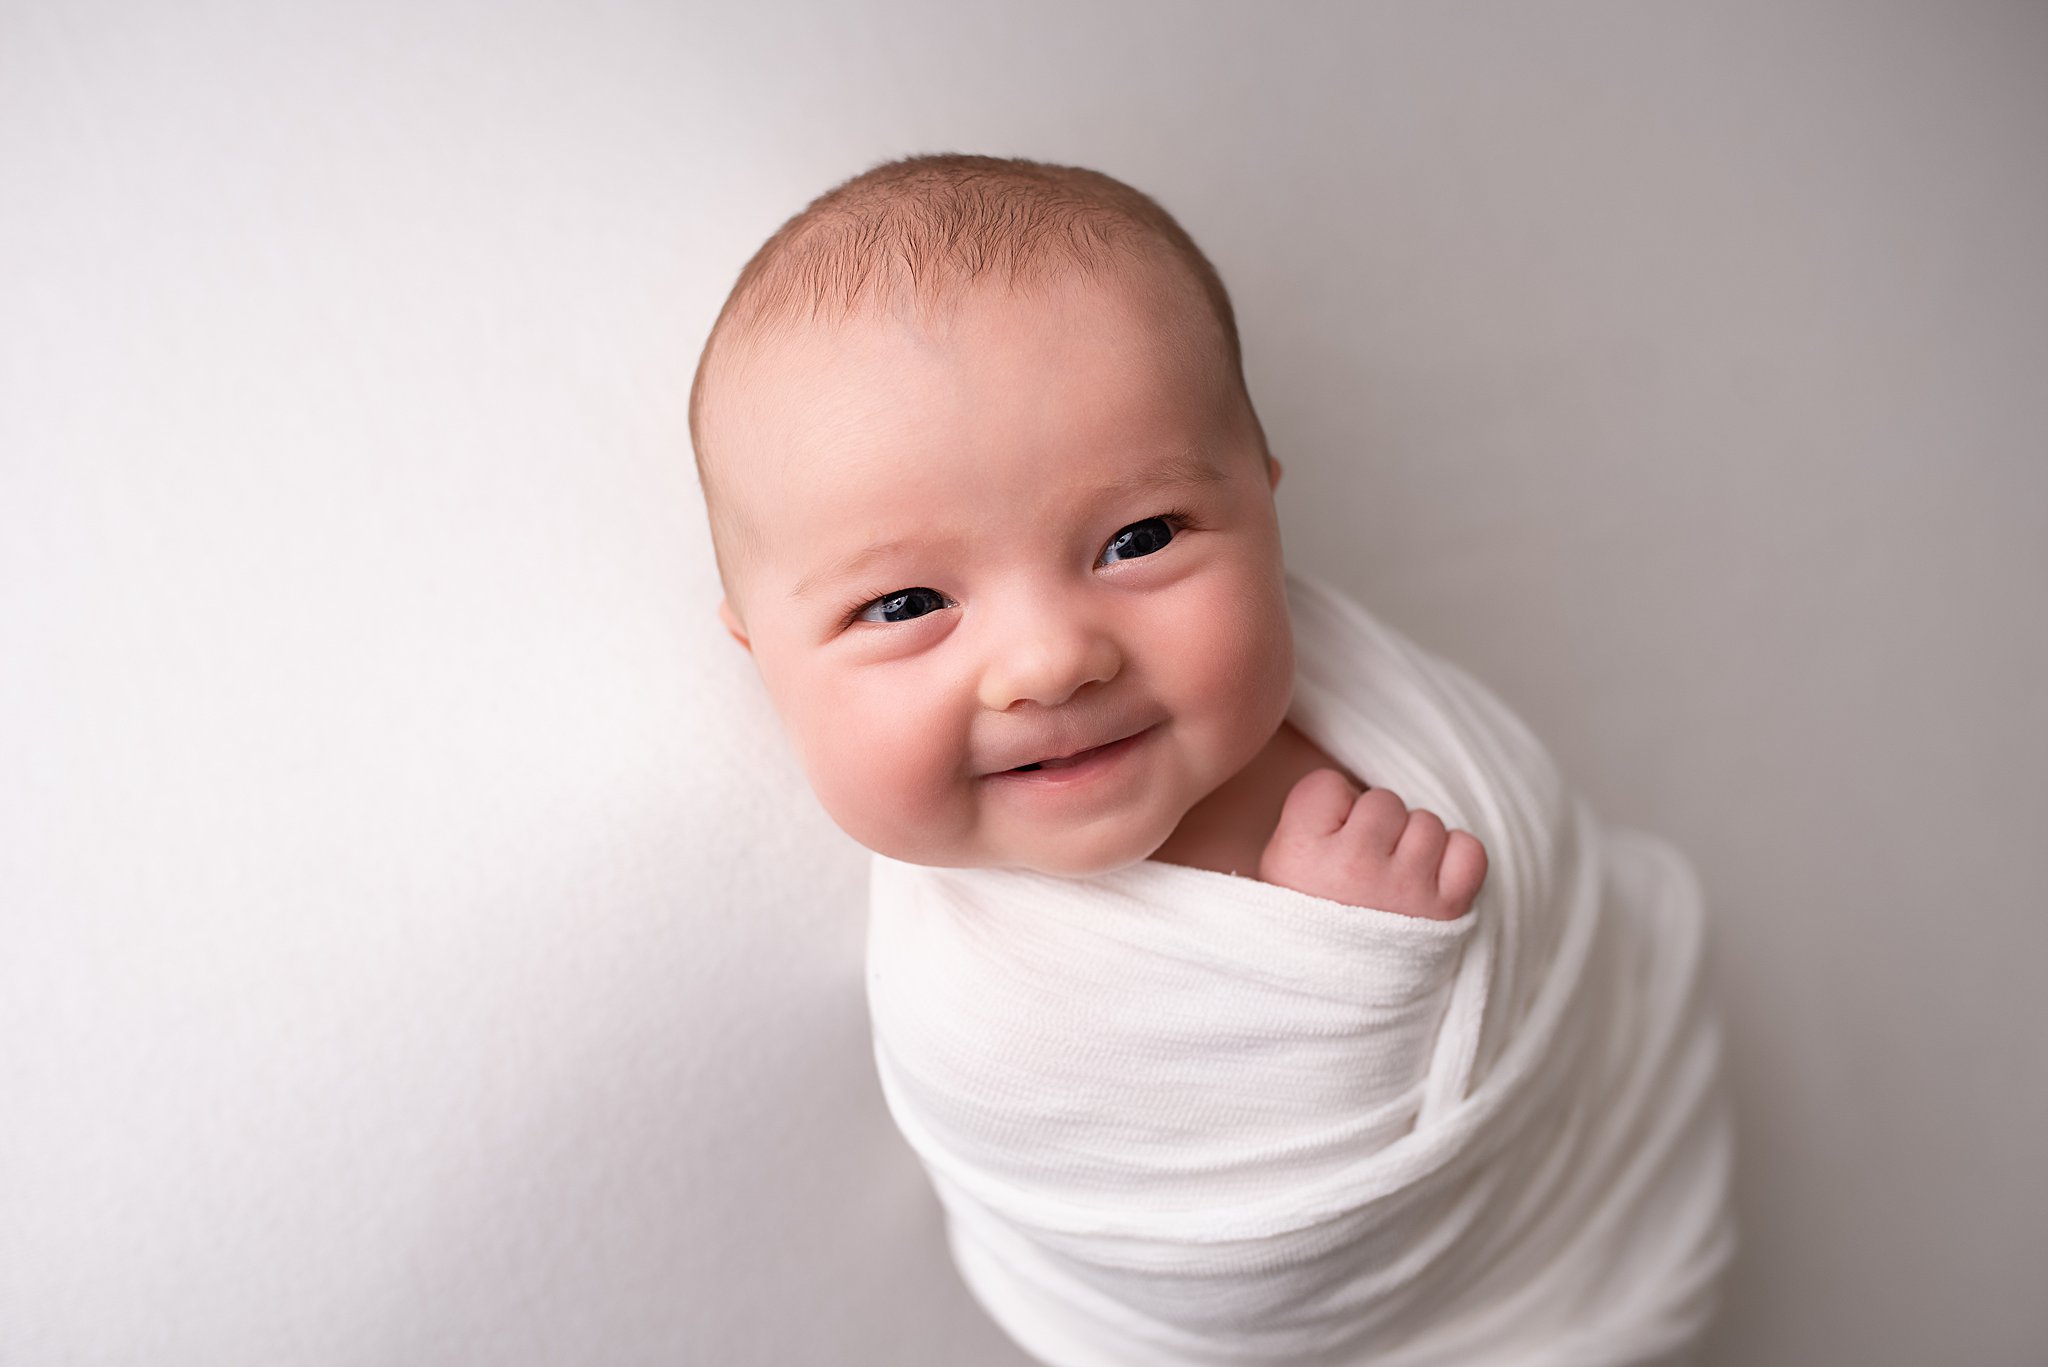 A newborn baby smiles while laying in a white swaddle